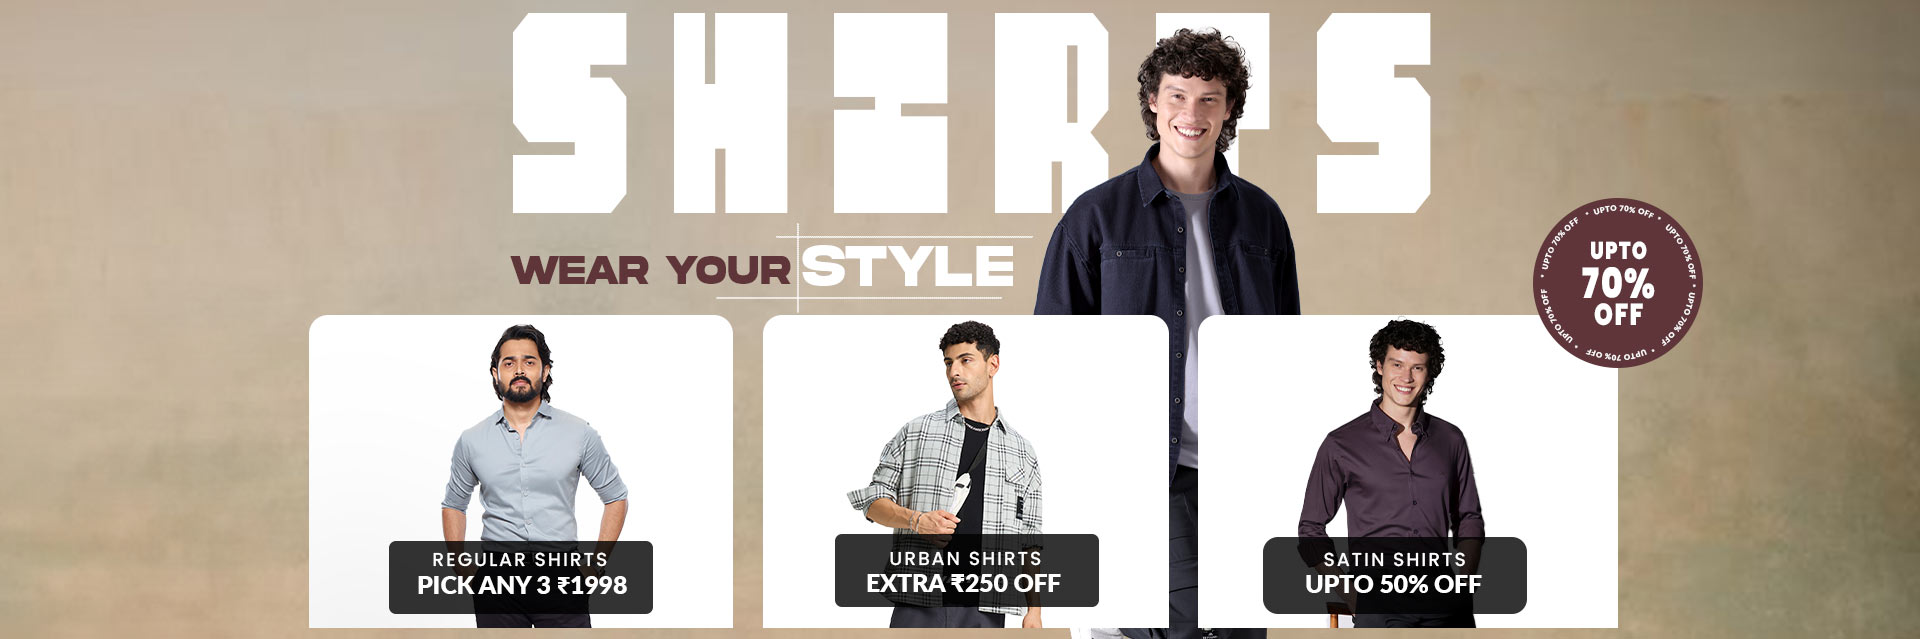 online shopping site for mens shirts